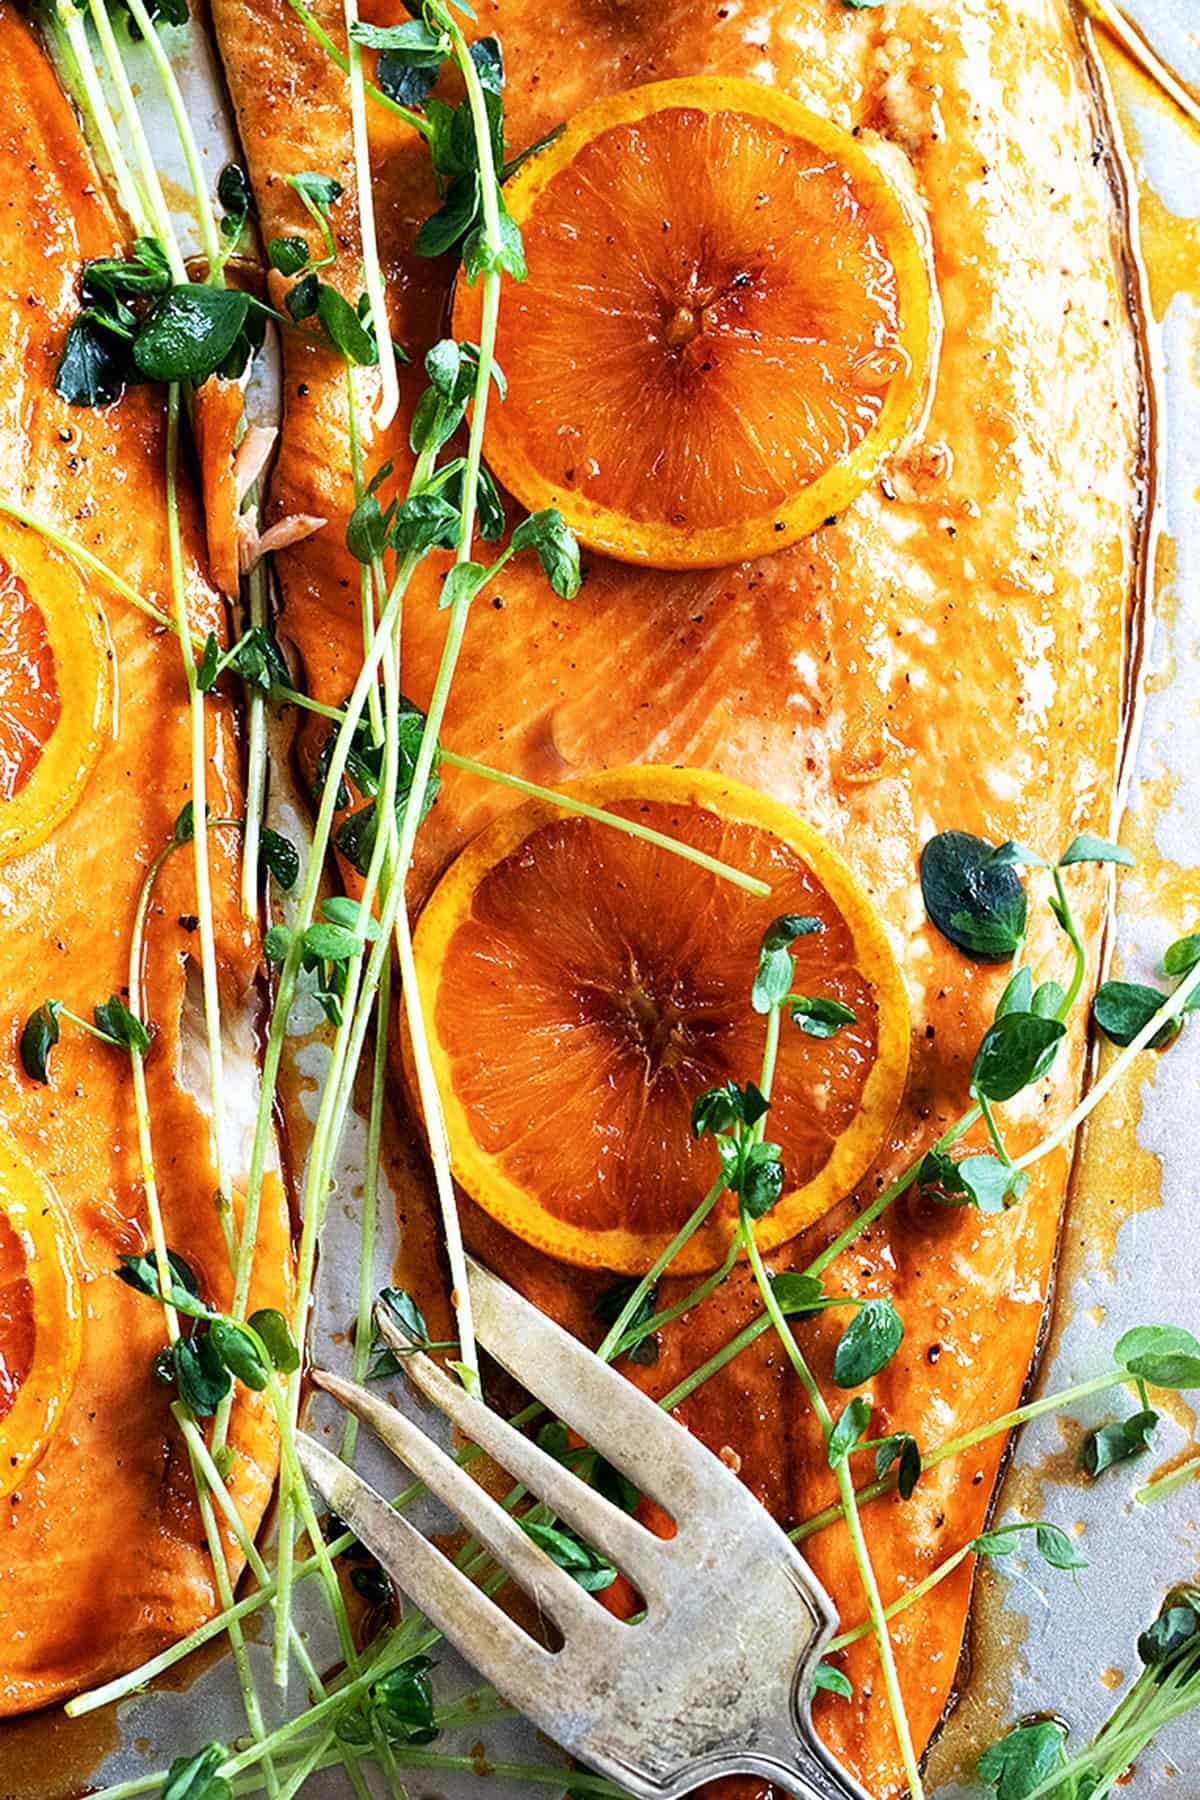 A fillet of orange salmon with herbs.